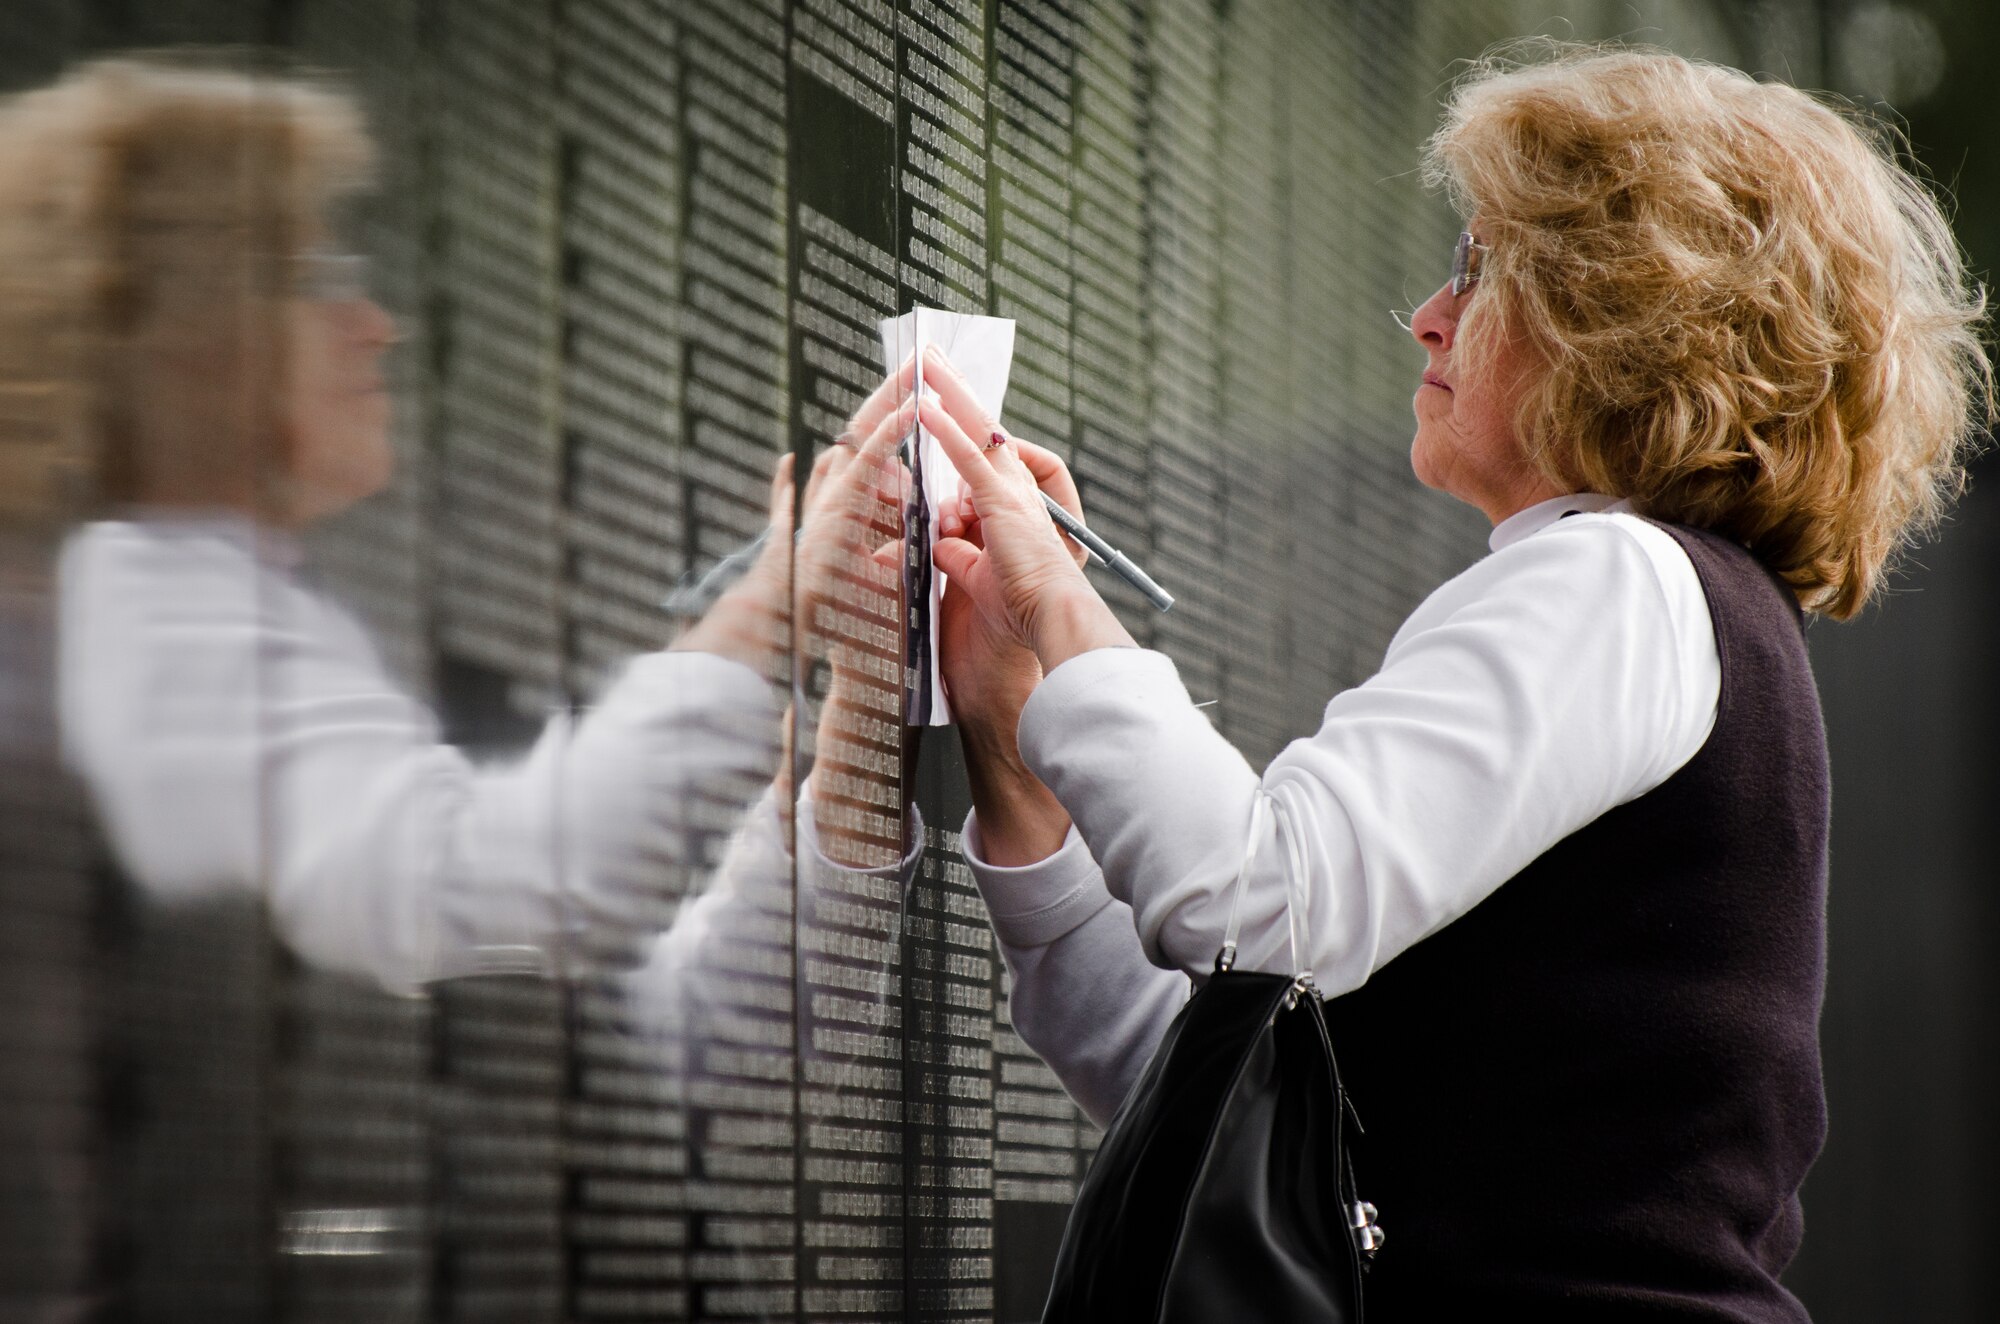 Jane Lee of Louisville, Ky., creates a rubbing from a soldier's name during closing ceremonies for the Dignity Memorial Vietnam Wall at Resthaven Memorial Park in Louisville, on Sept. 11, 2011. Lee, whose first husband served in Vietnam, chose the name at random because, she said, "everyone here is important -- each one of these people gave their all in service to our country." (U.S. Air Force photo by Maj. Dale Greer)